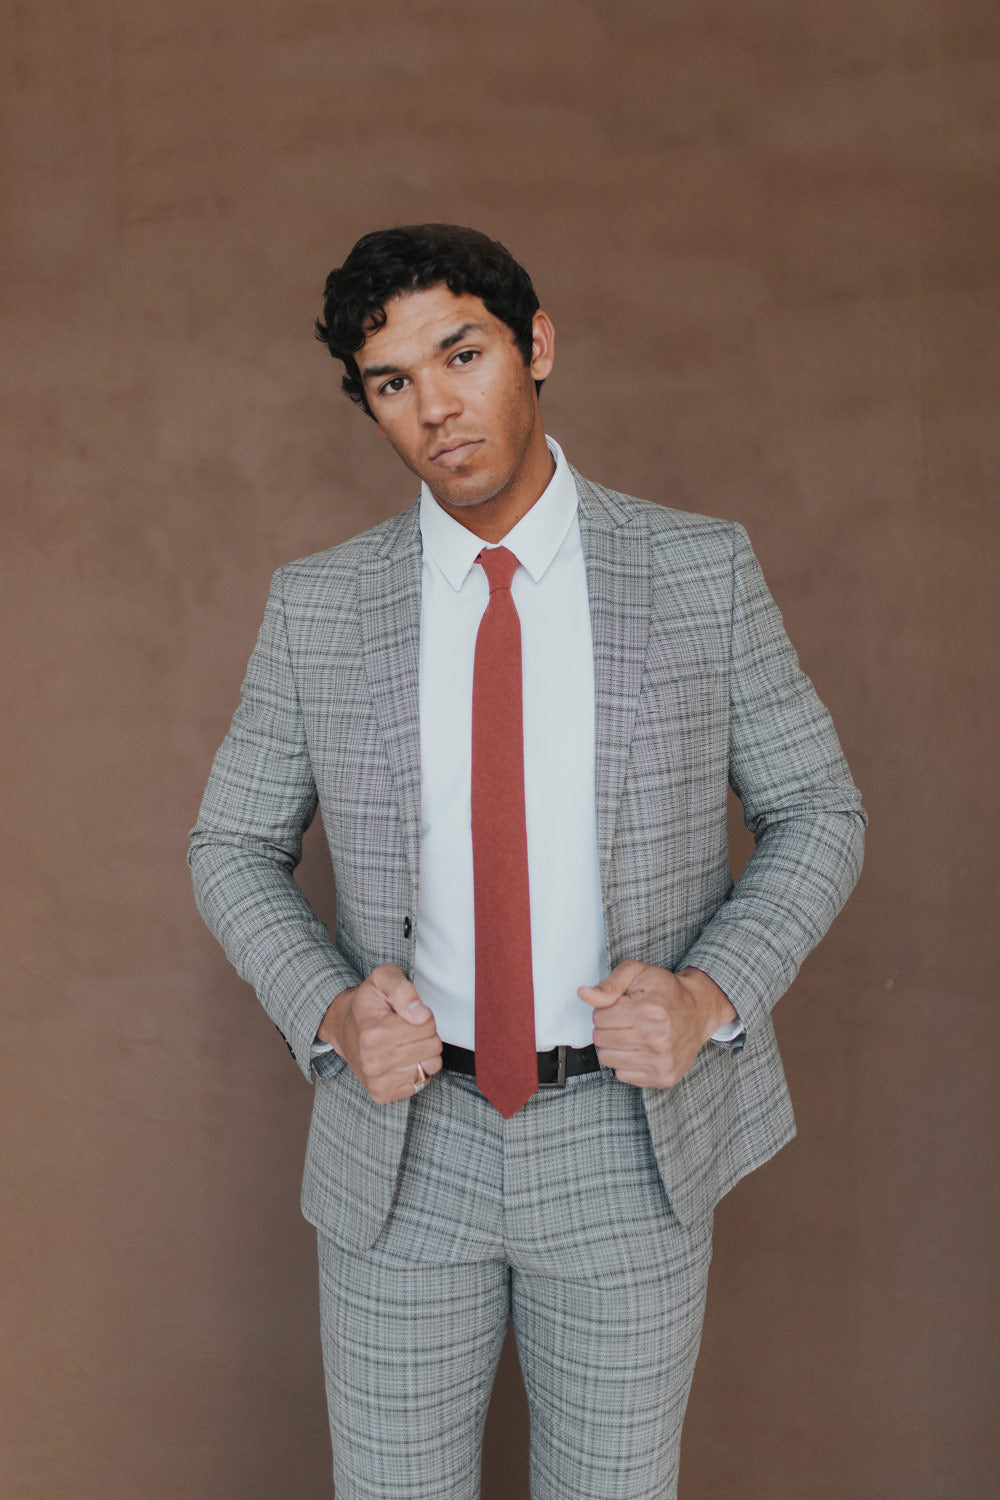 Rust Tie worn with a white shirt, black belt and gray plaid suit.